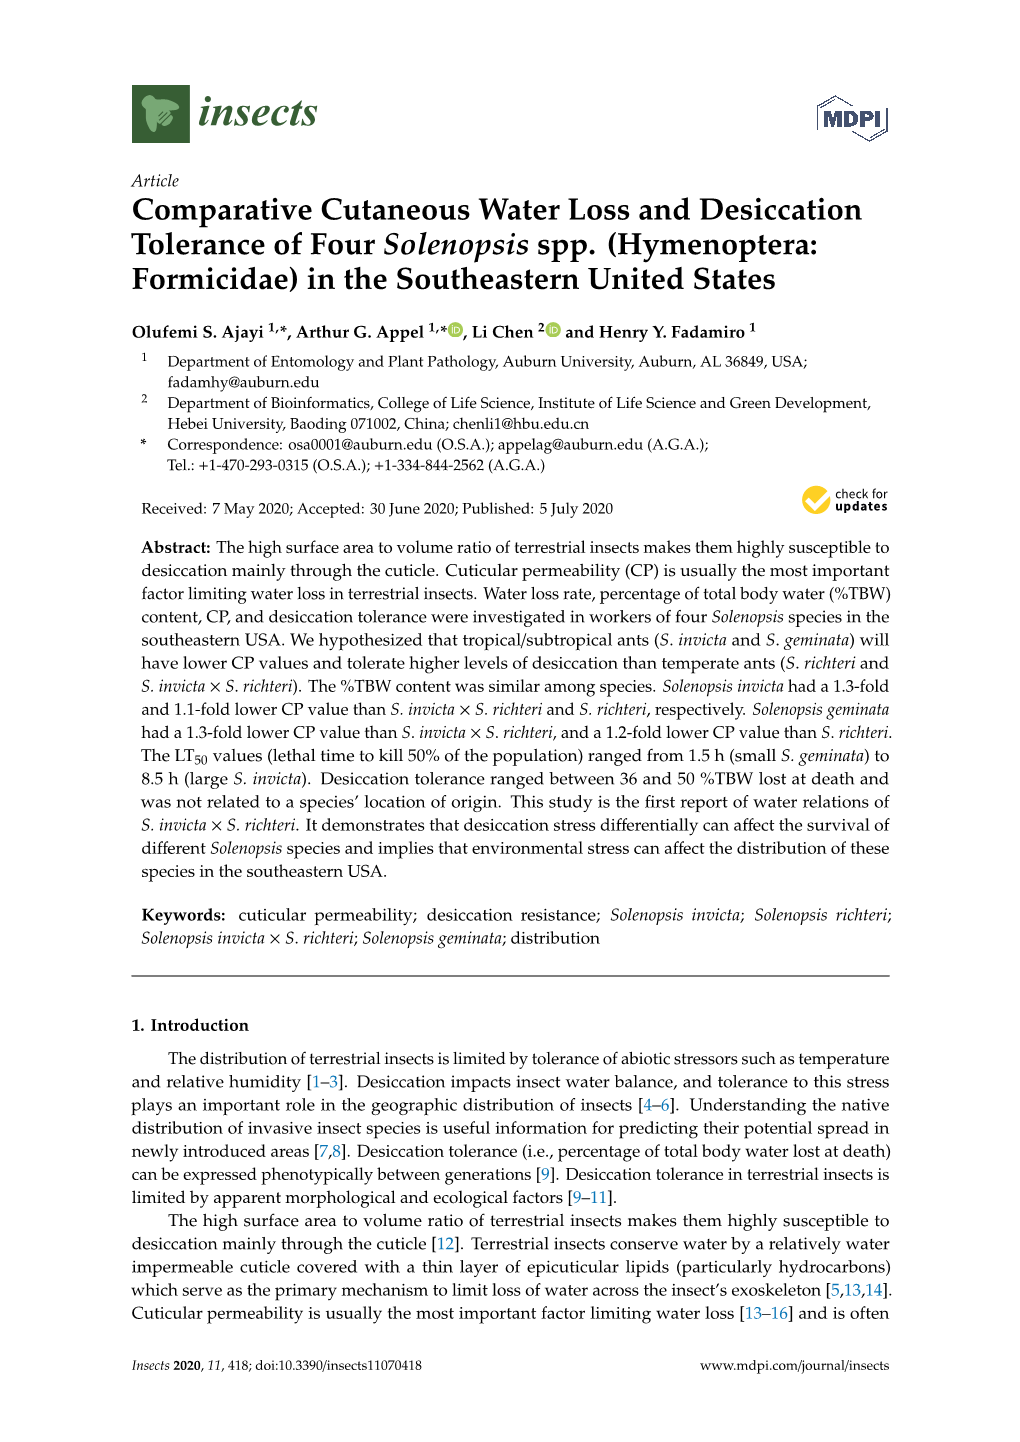 Comparative Cutaneous Water Loss and Desiccation Tolerance of Four Solenopsis Spp